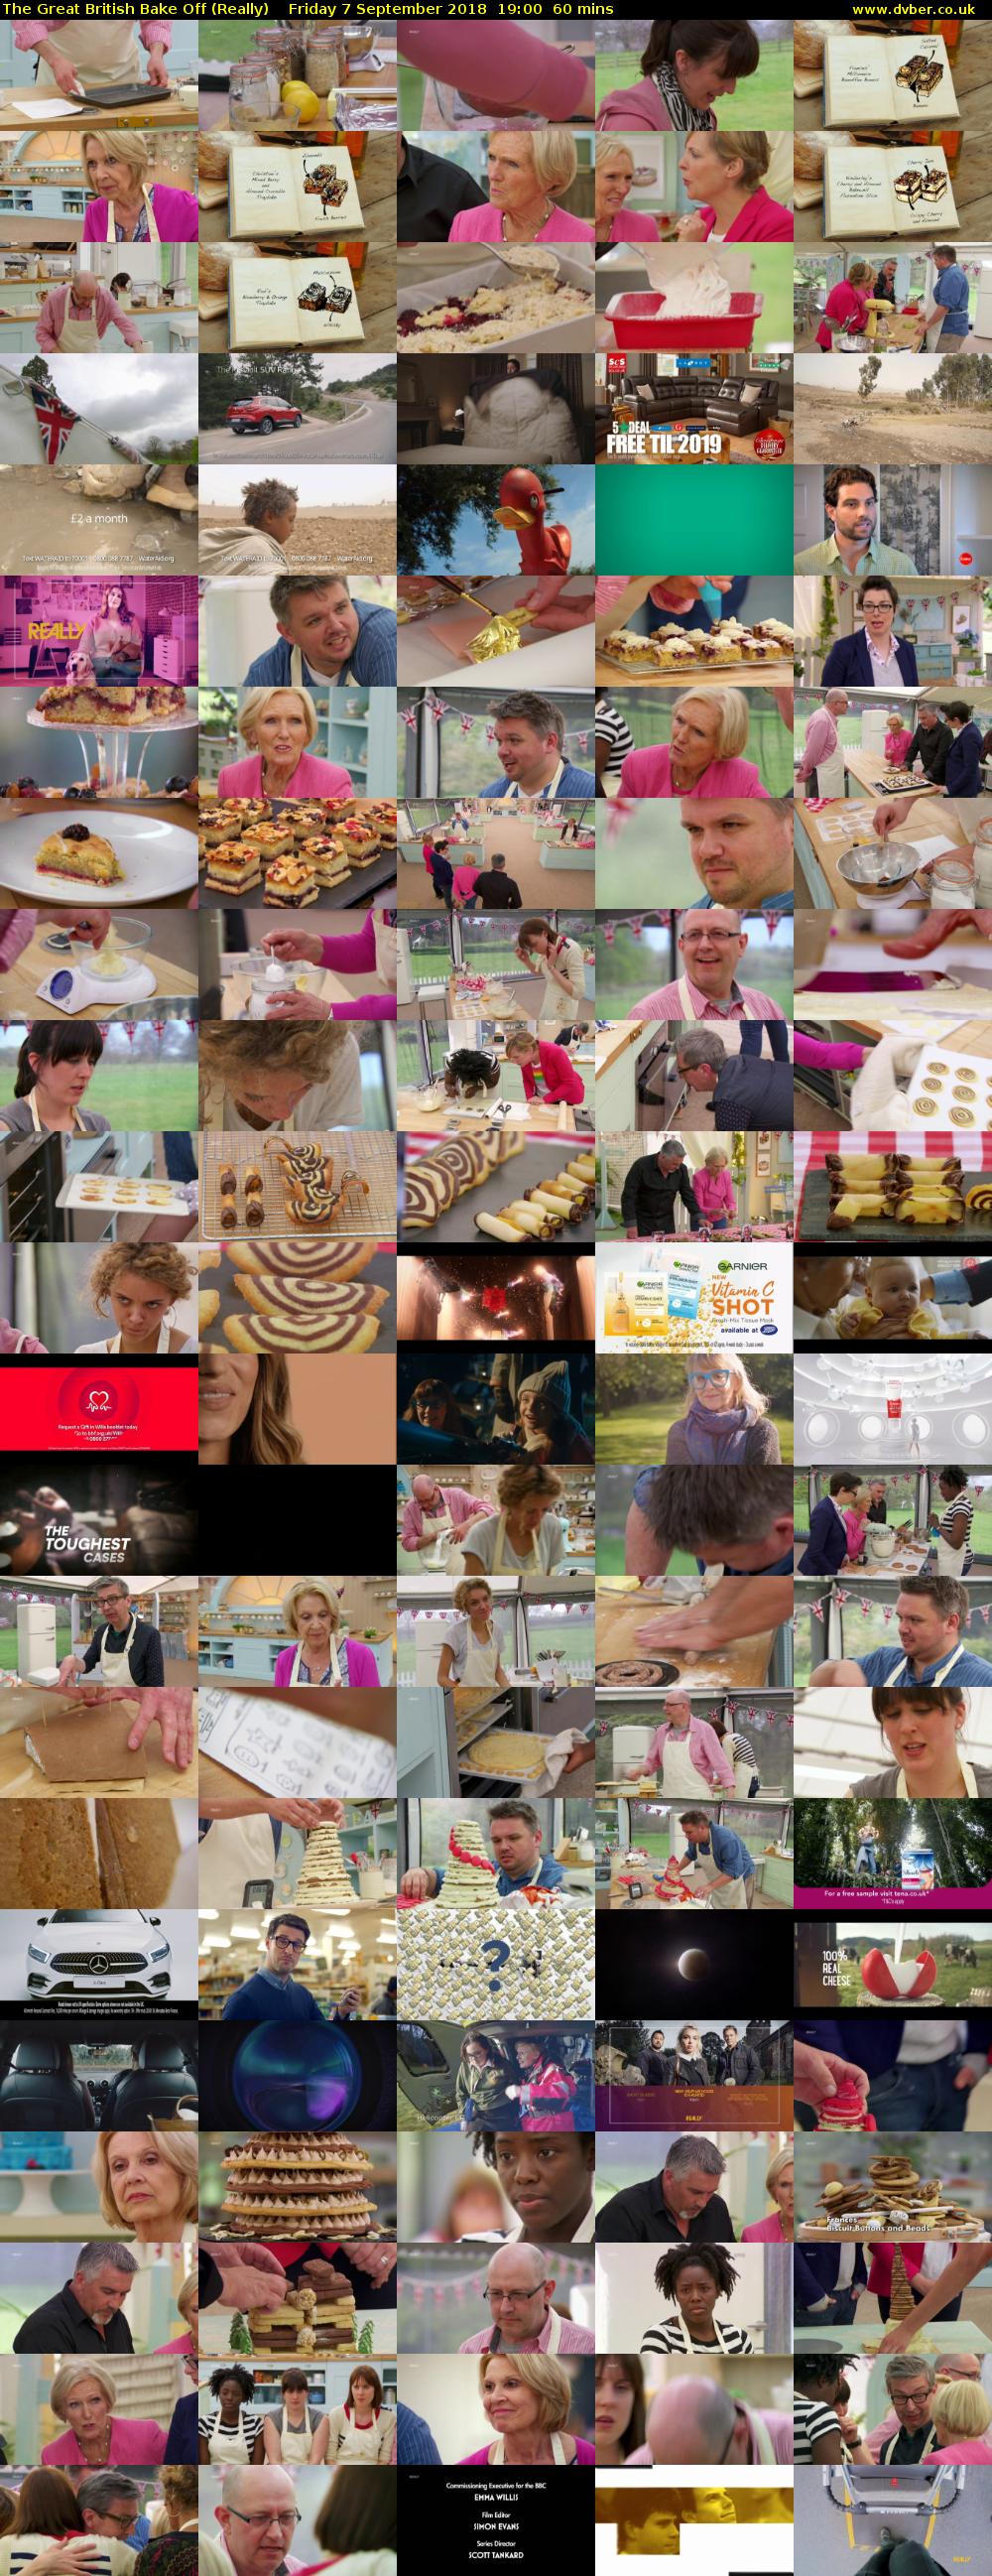 The Great British Bake Off (Really) Friday 7 September 2018 19:00 - 20:00